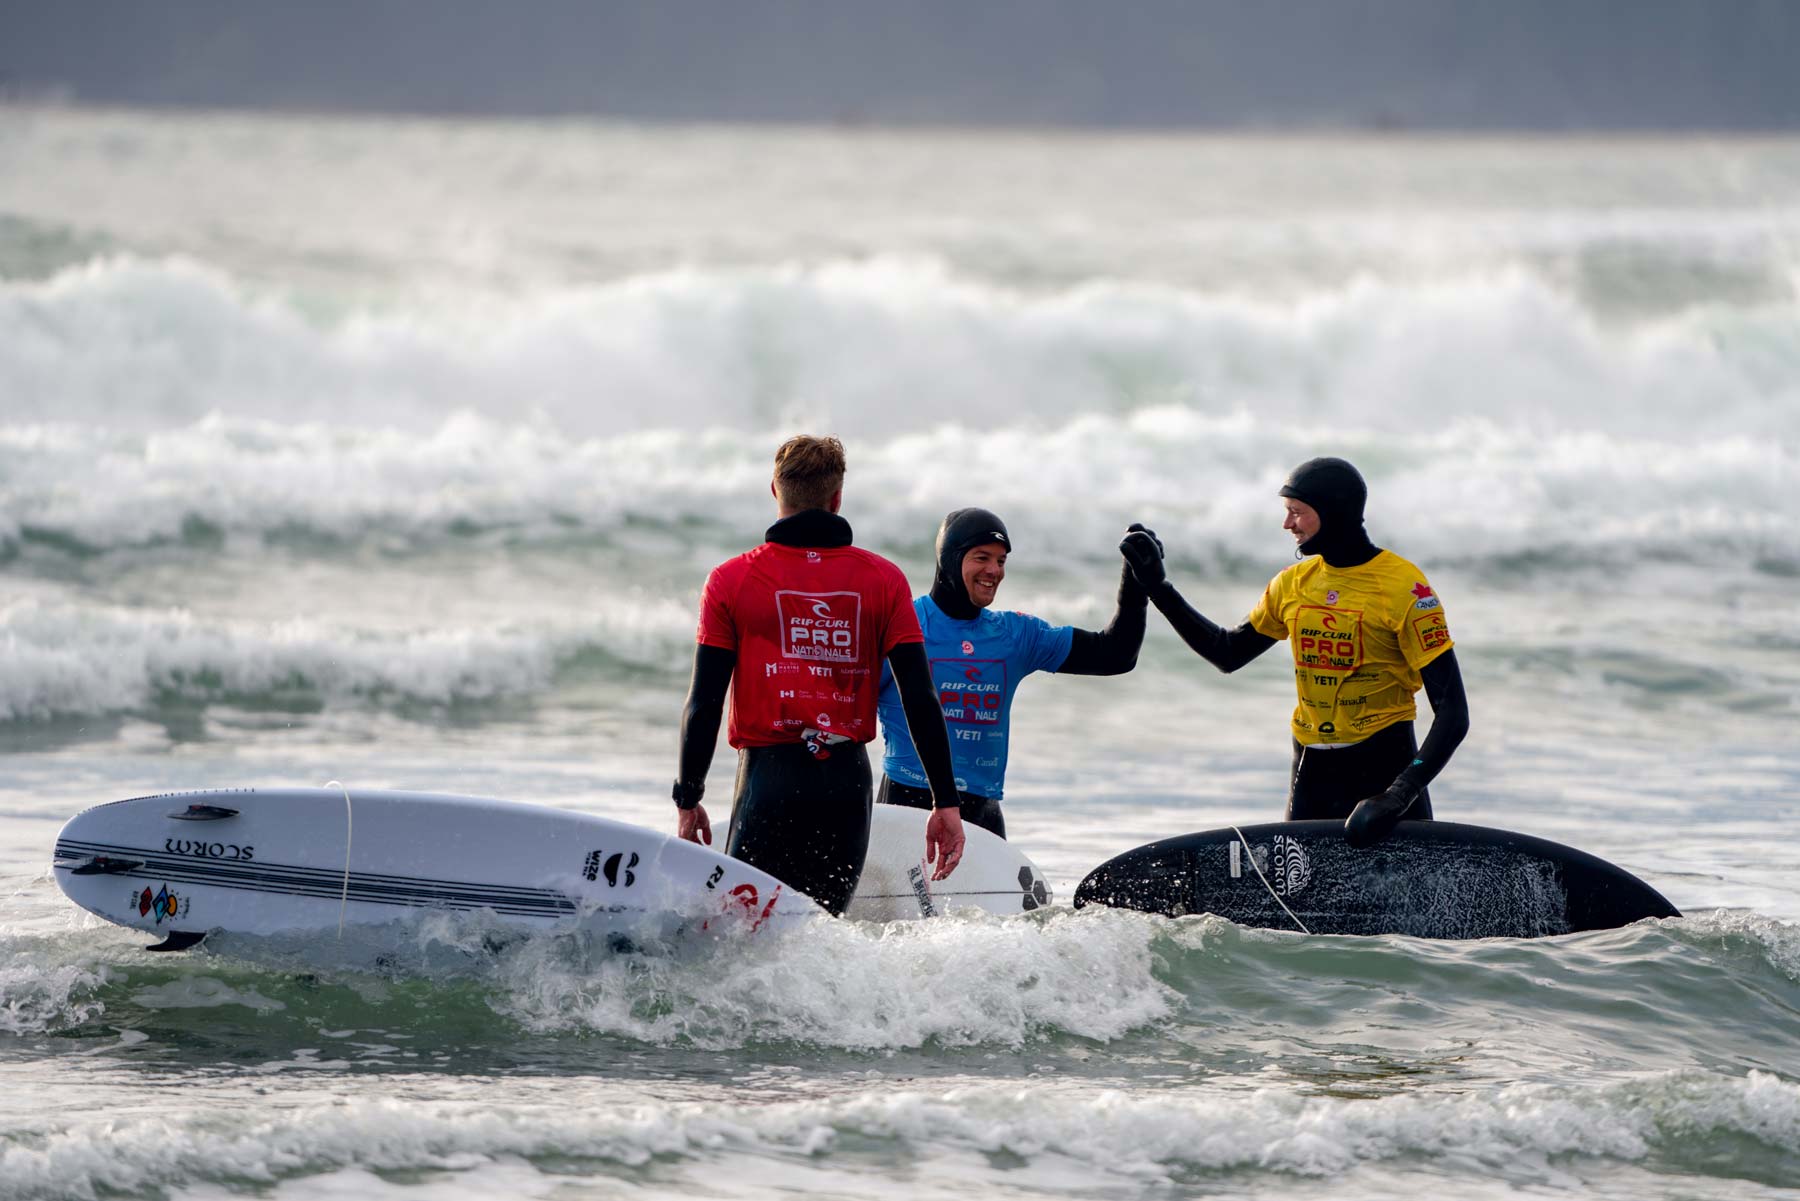 Technical surf coaching for beginners and competitors at Surf